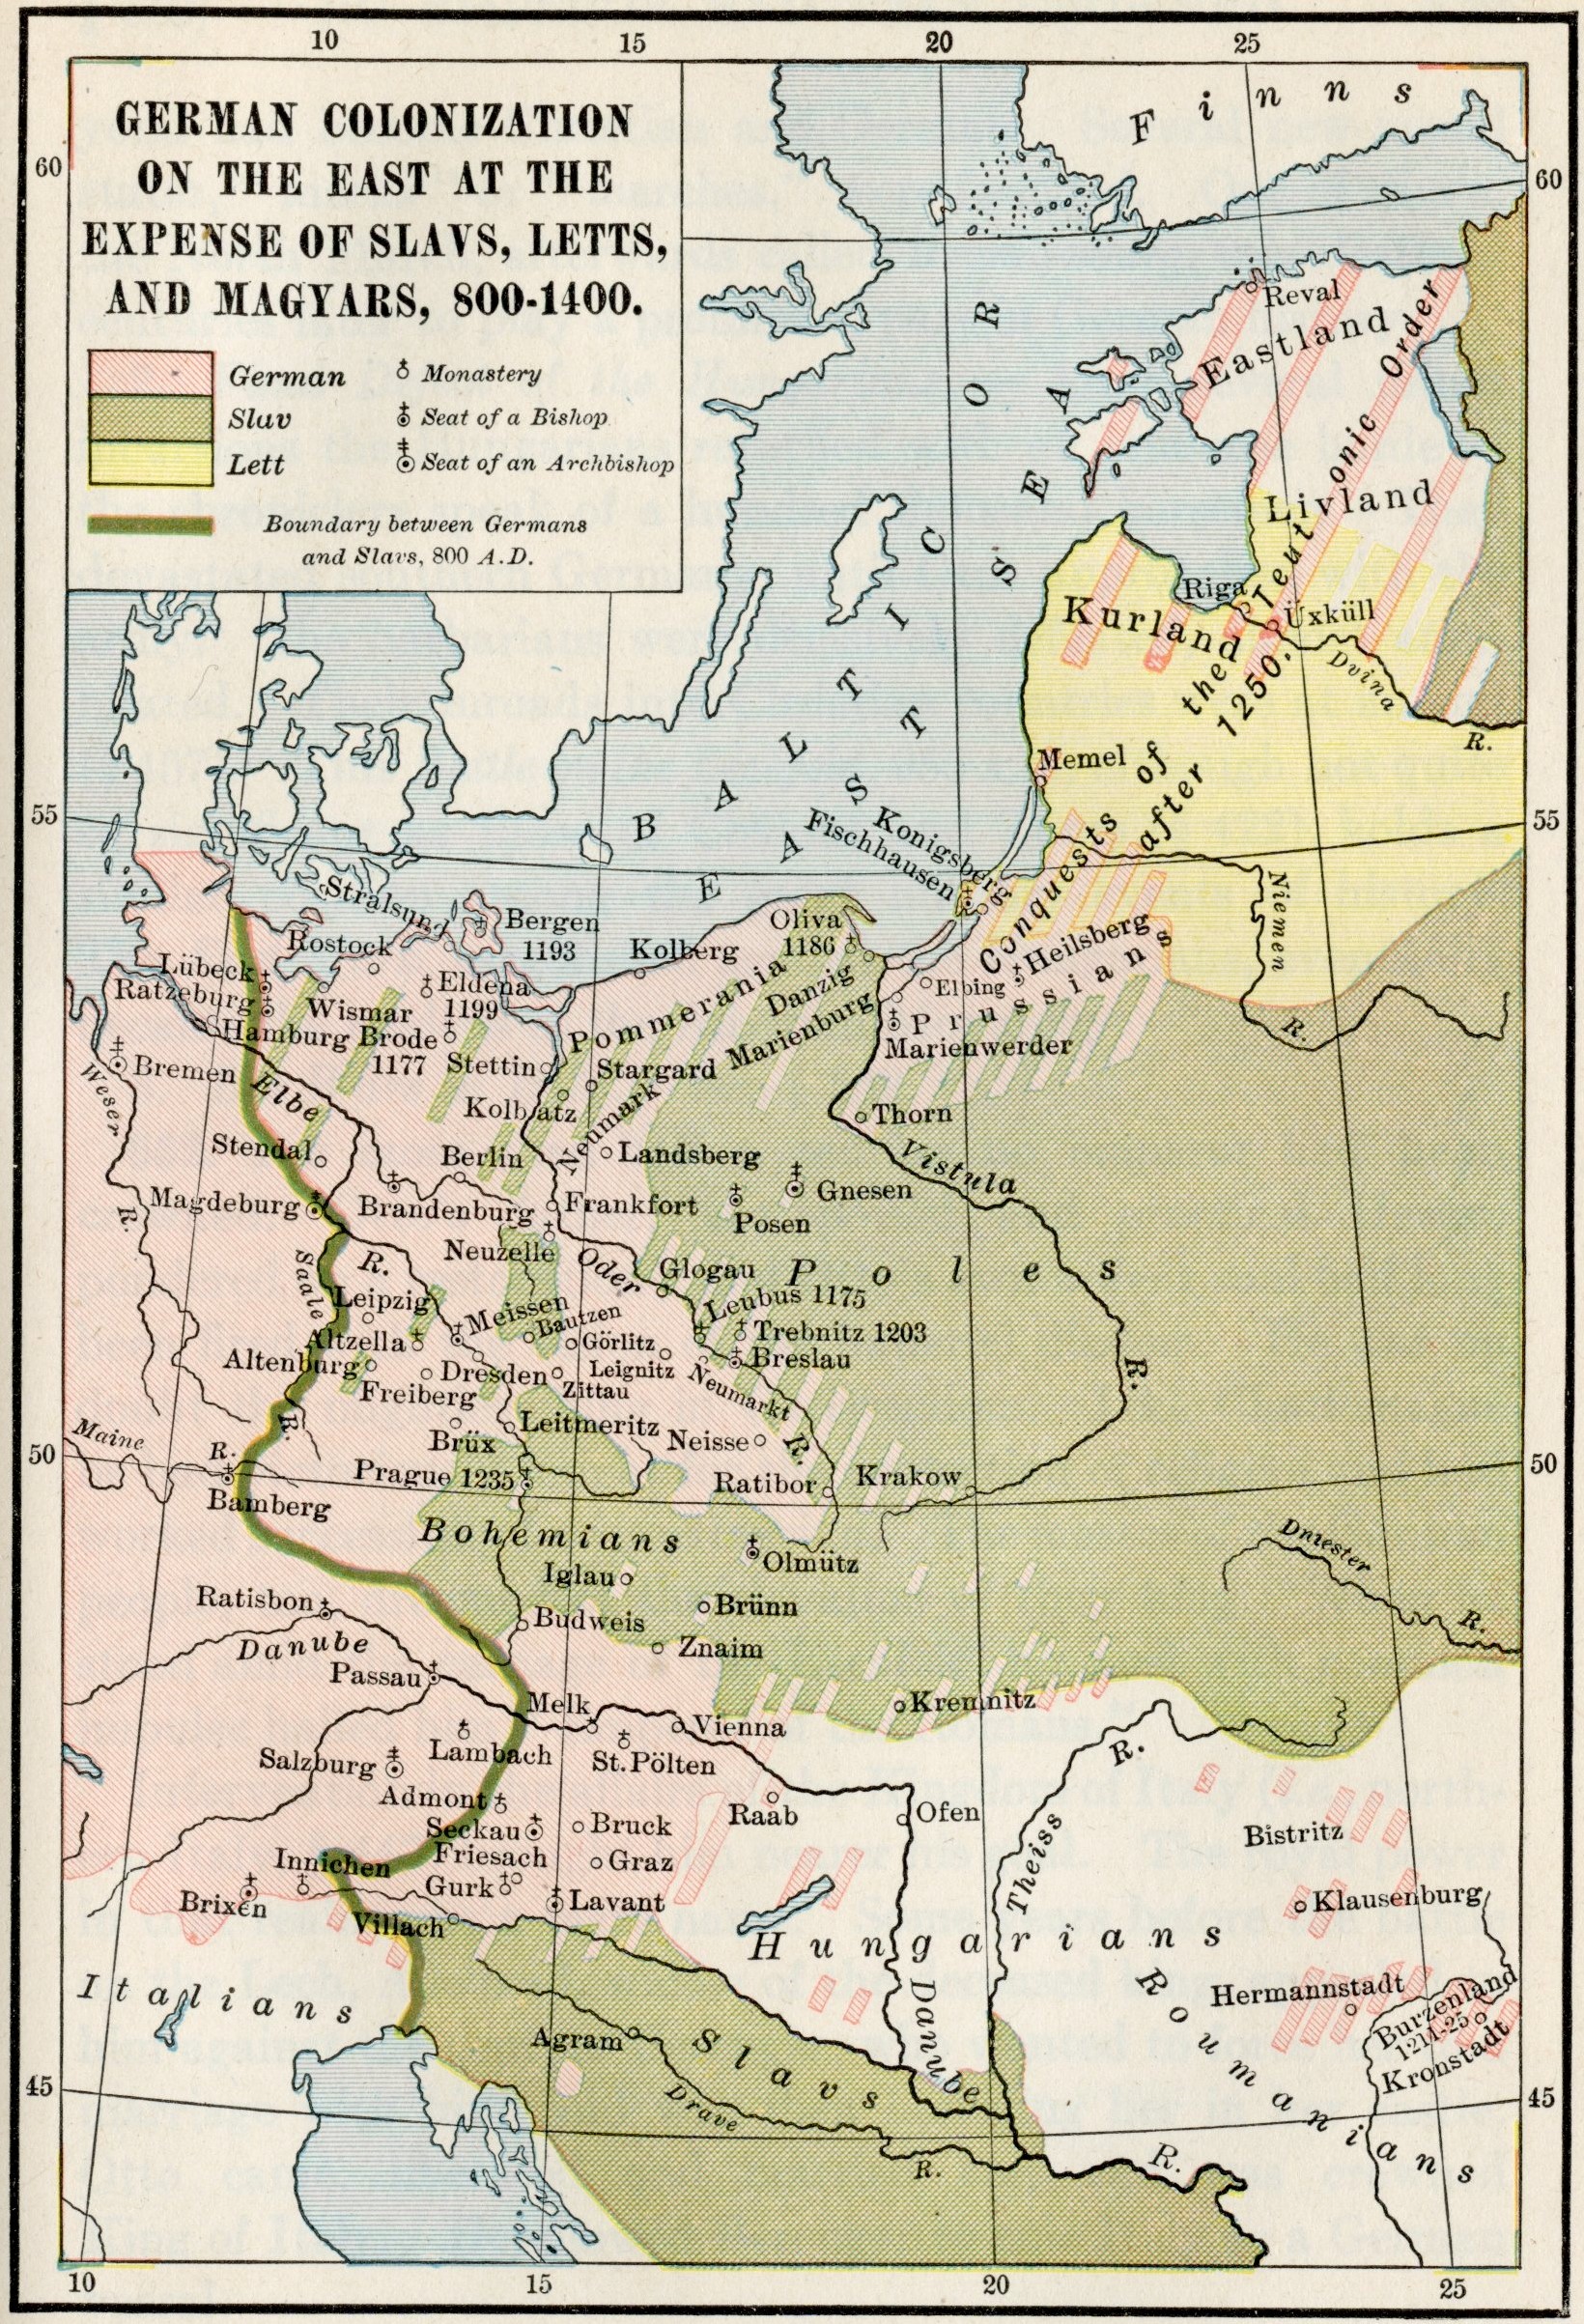 German Colonization on the East at the Expense of Slavs, Letts, and Magyars, 800-1400